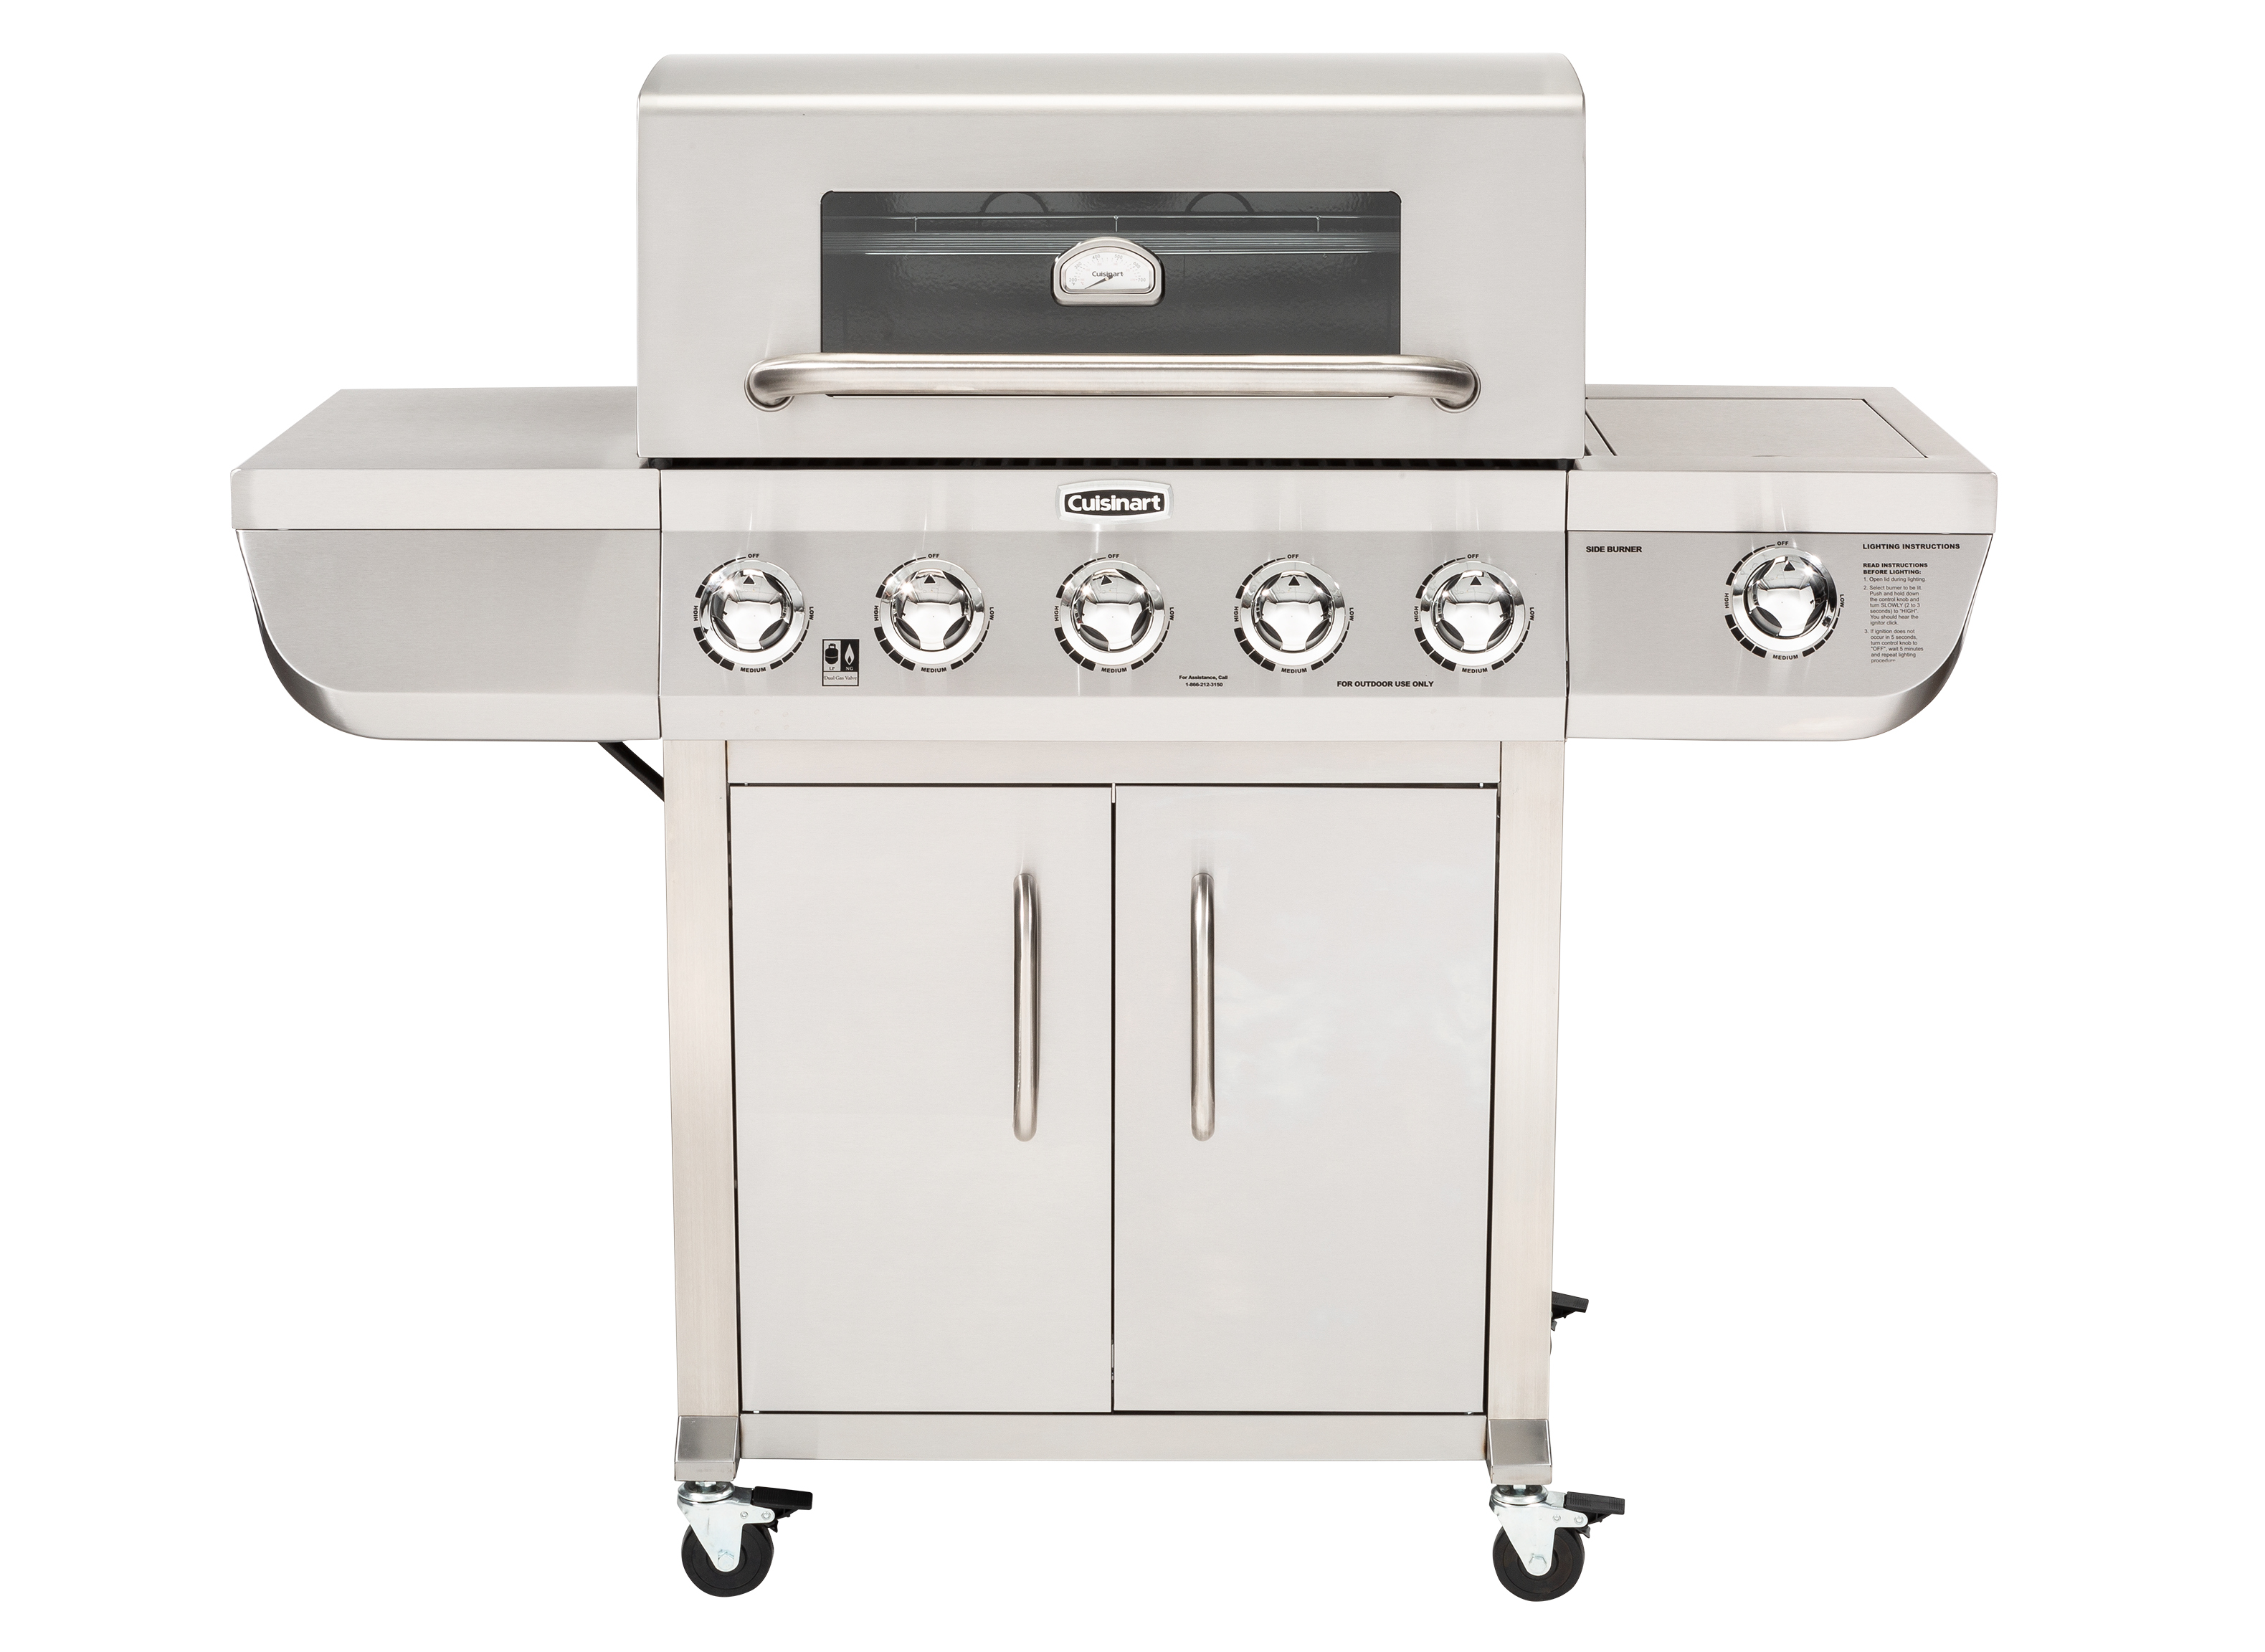 https://crdms.images.consumerreports.org/prod/products/cr/models/405520-midsize-gas-grills-room-for-18-to-28-burgers-cuisinart-5-burners-dual-fuel-gas2556as-walmart-10026661.png